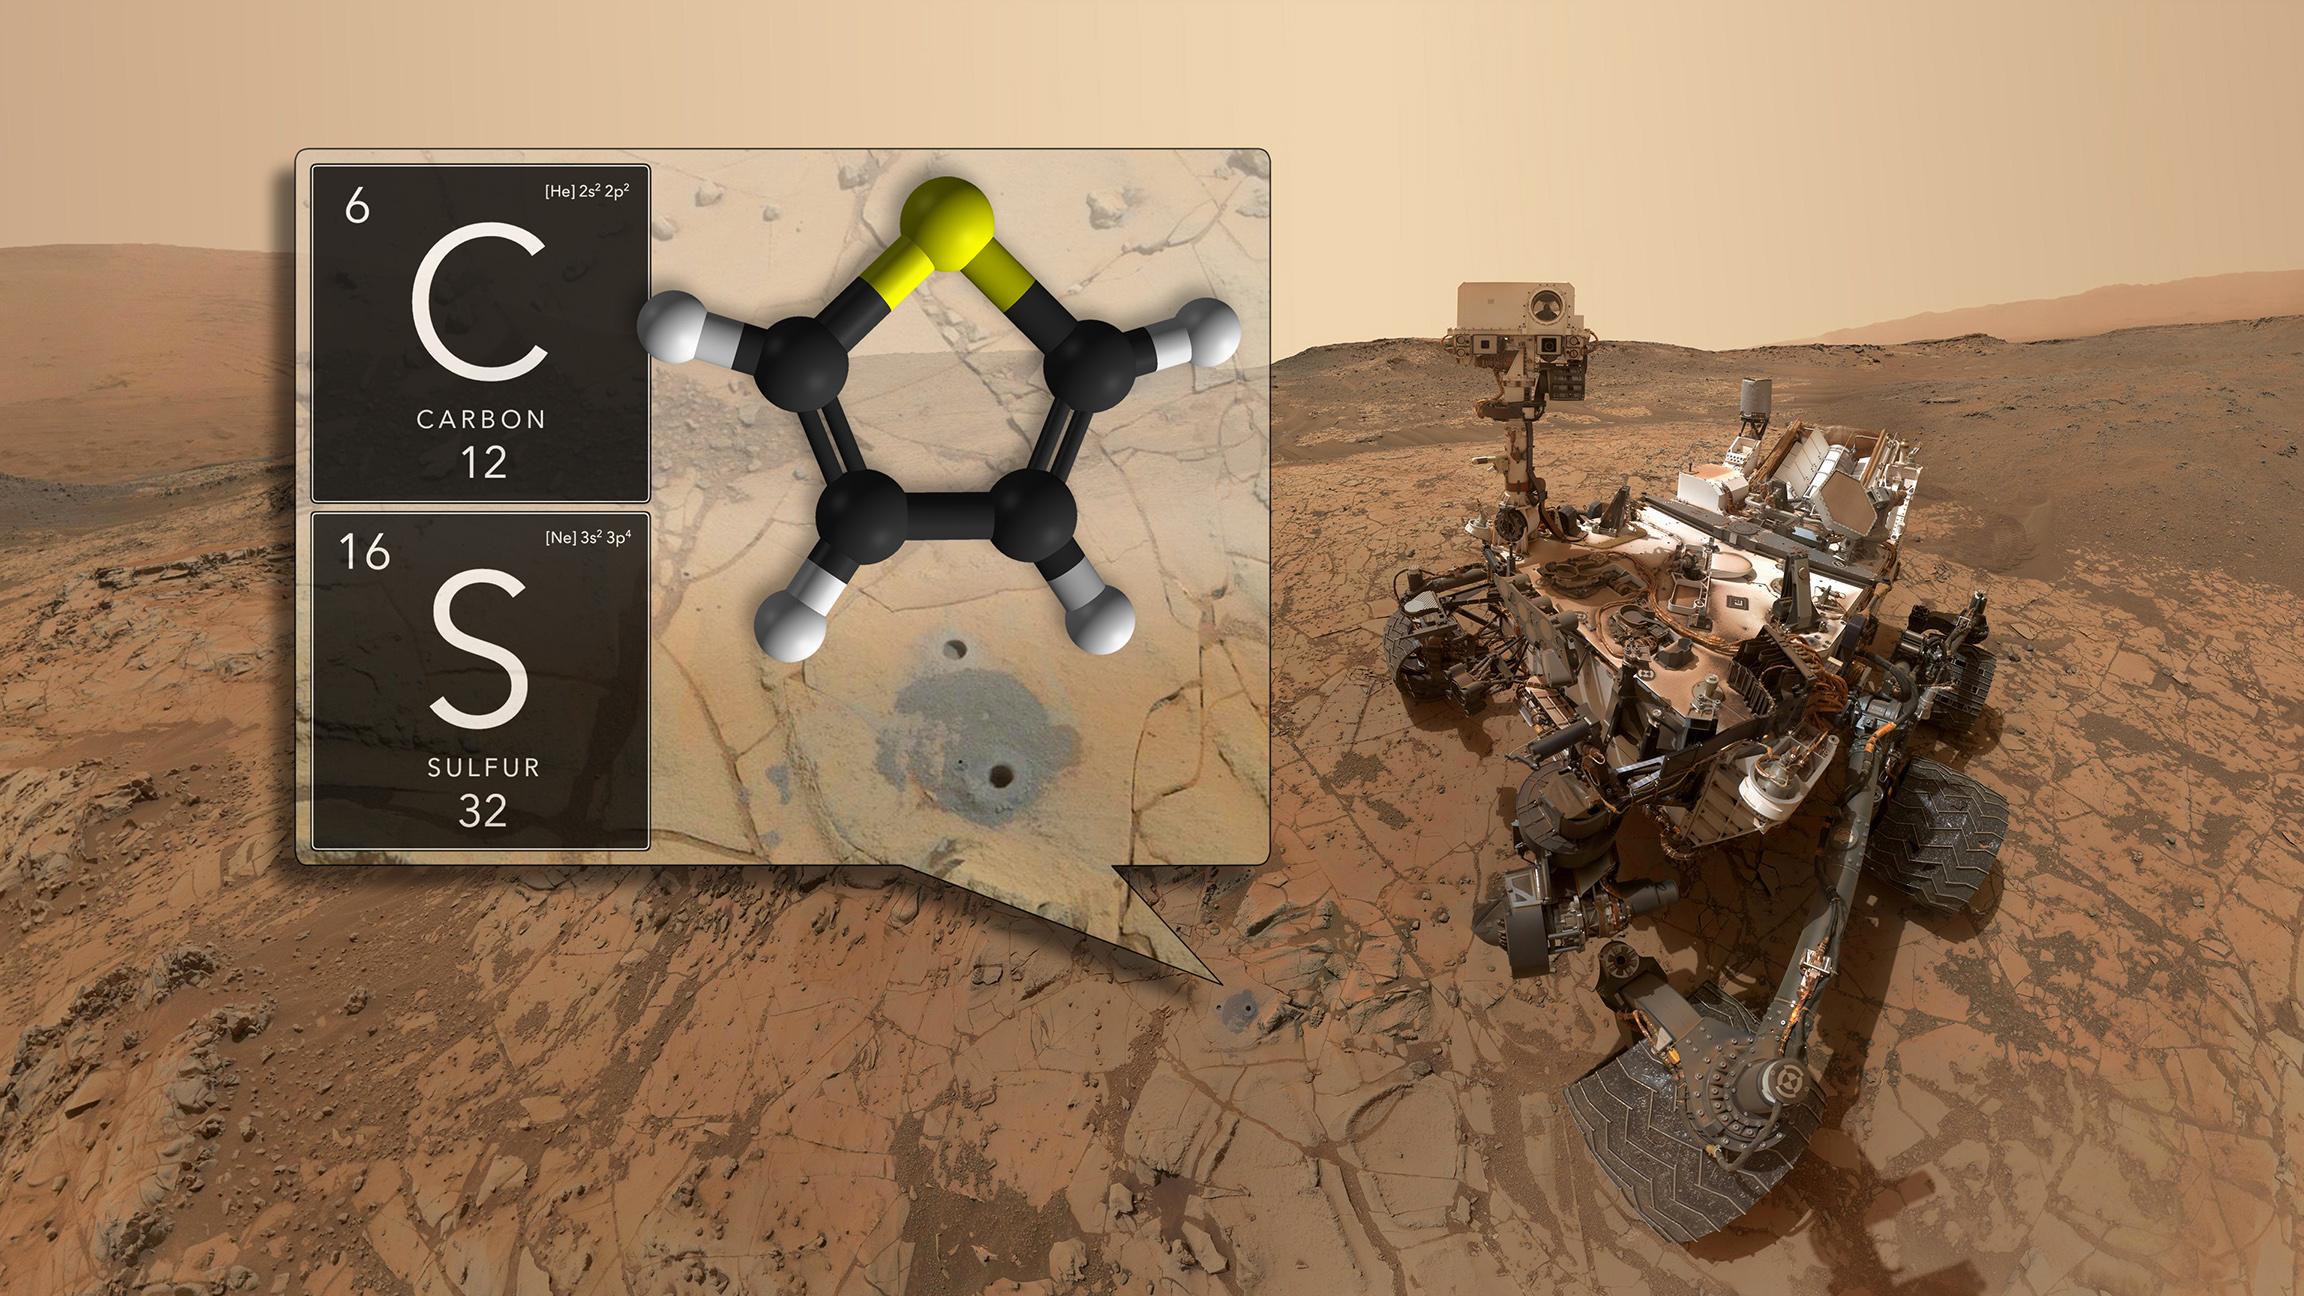 NASA’s Curiosity rover has discovered ancient organic molecules on Mars, embedded within sedimentary rocks that are billions of years old. (Credit: NASA / GSFC)